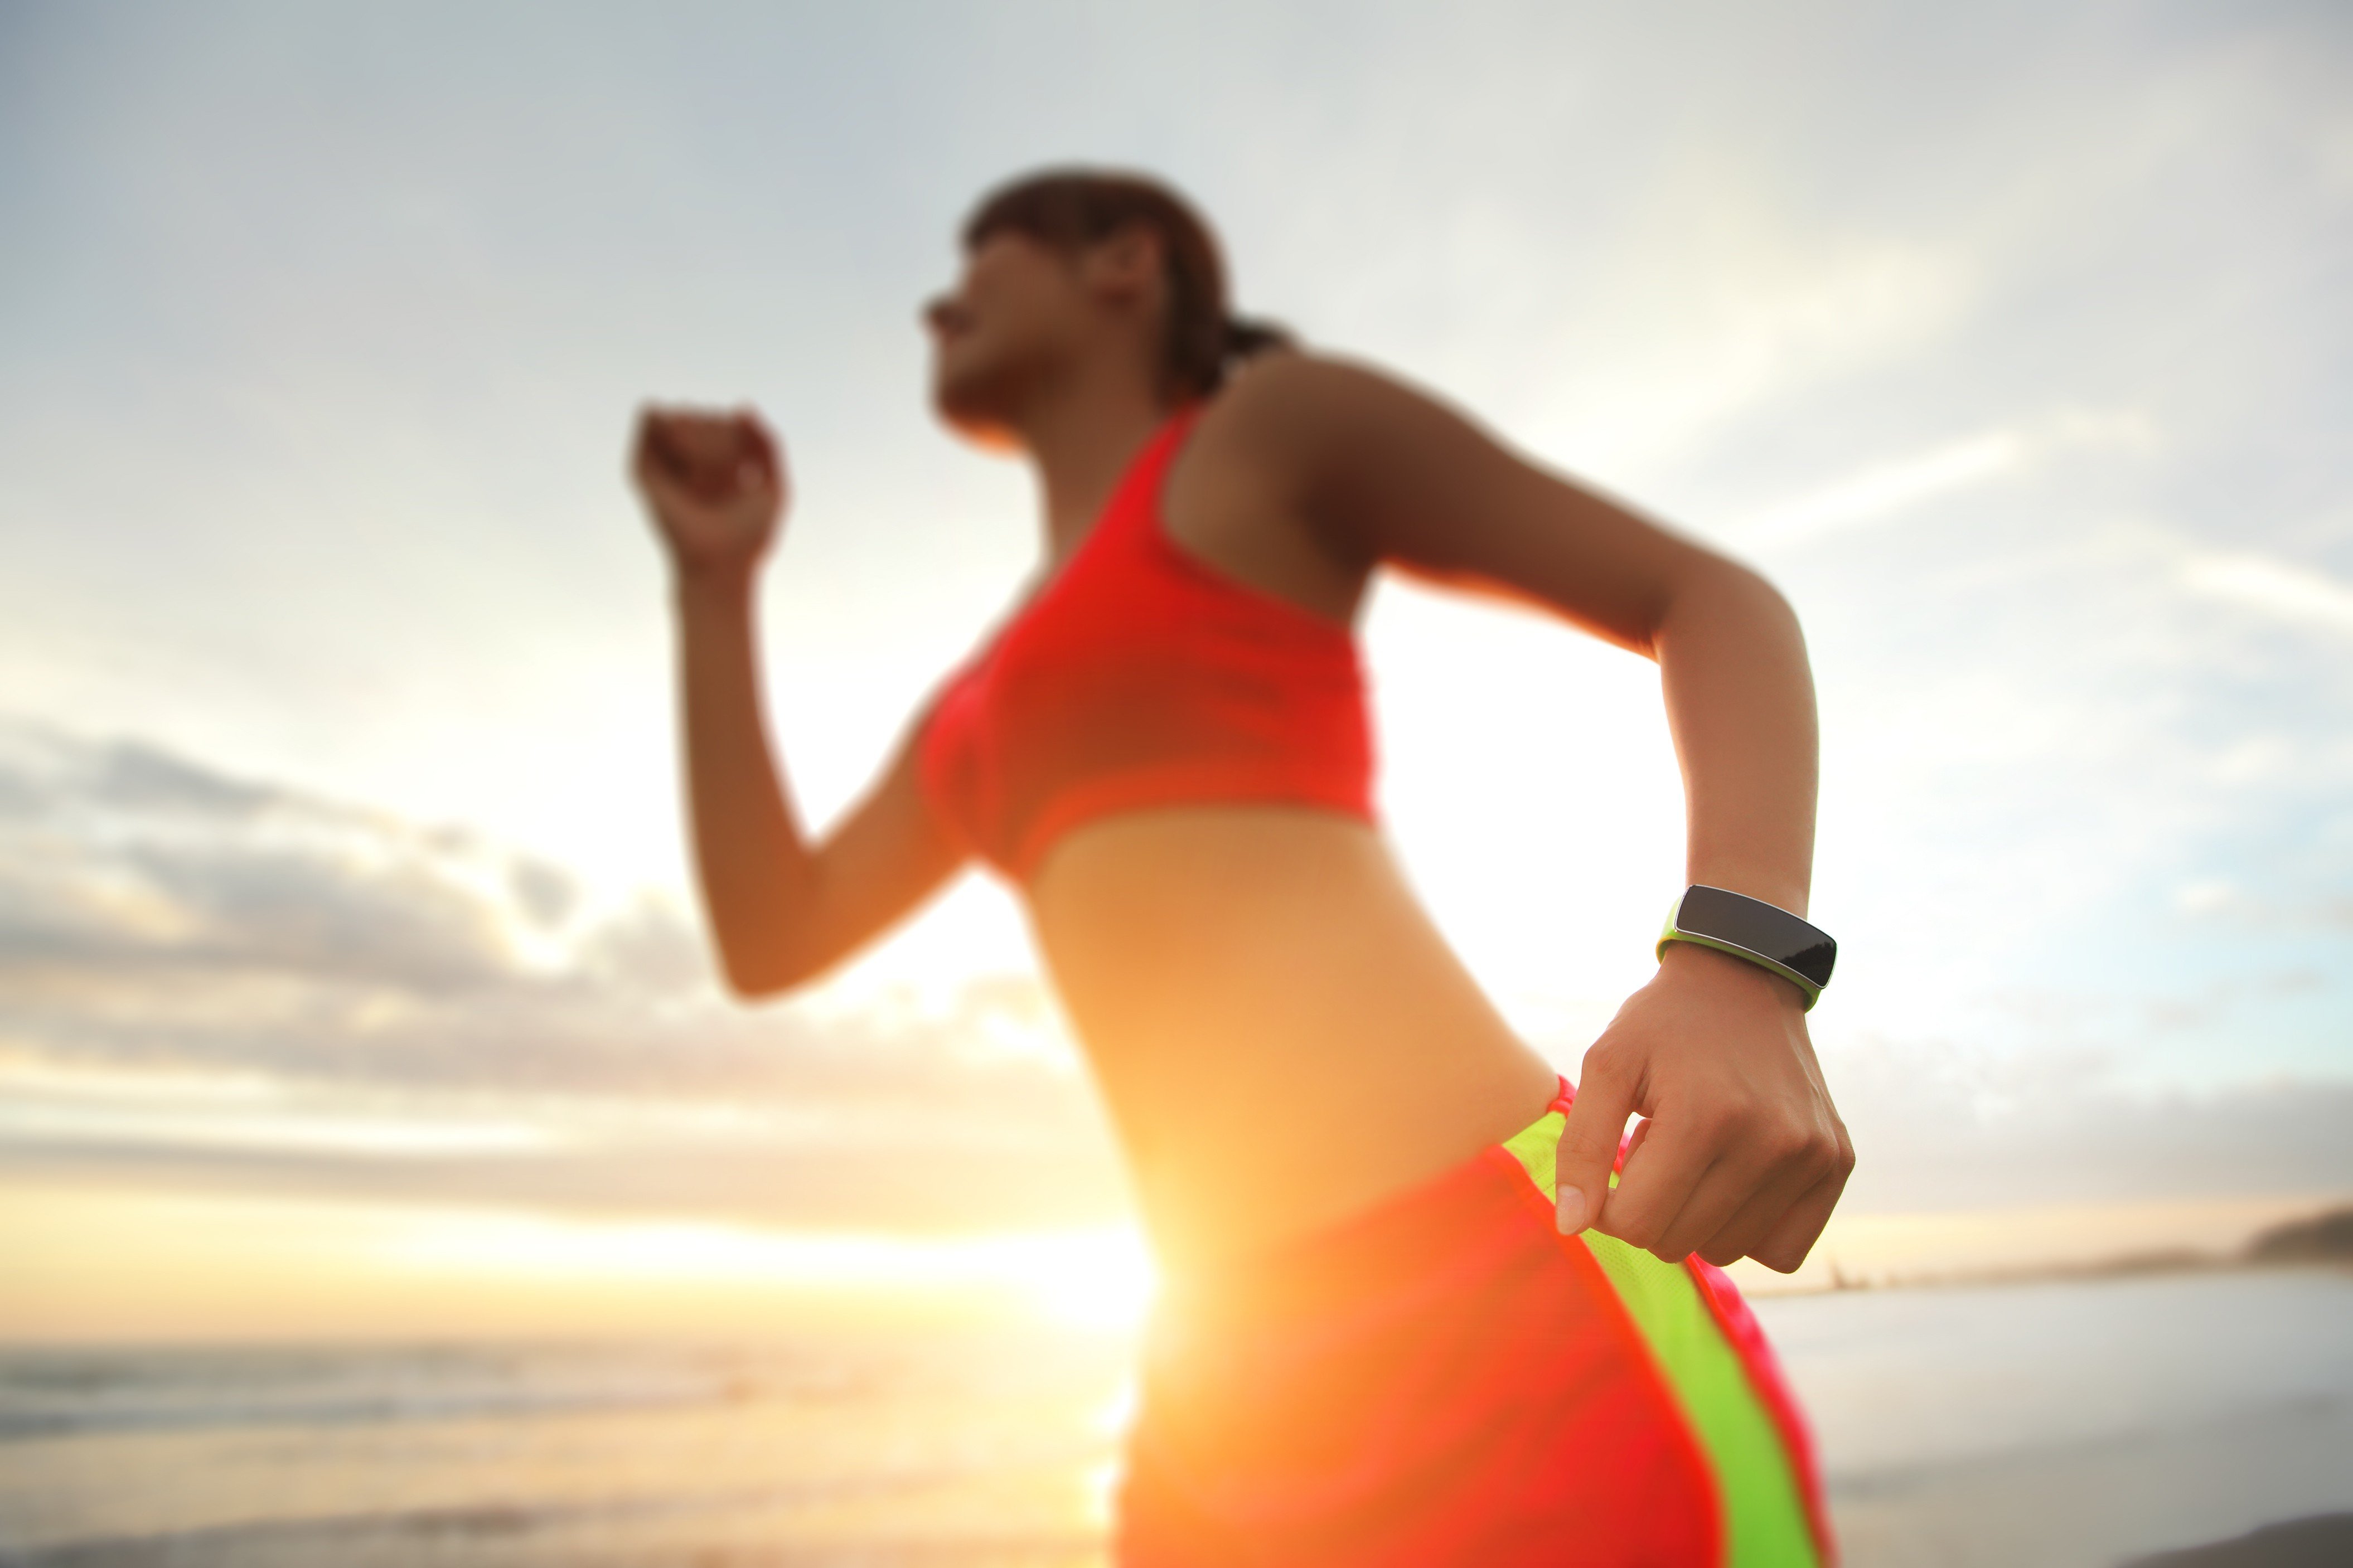 Fitness wearables are increasingly popular among the health conscious, and they are helpful tools for monitoring existing health problems and identifying illnesses, but the technology is not foolproof.